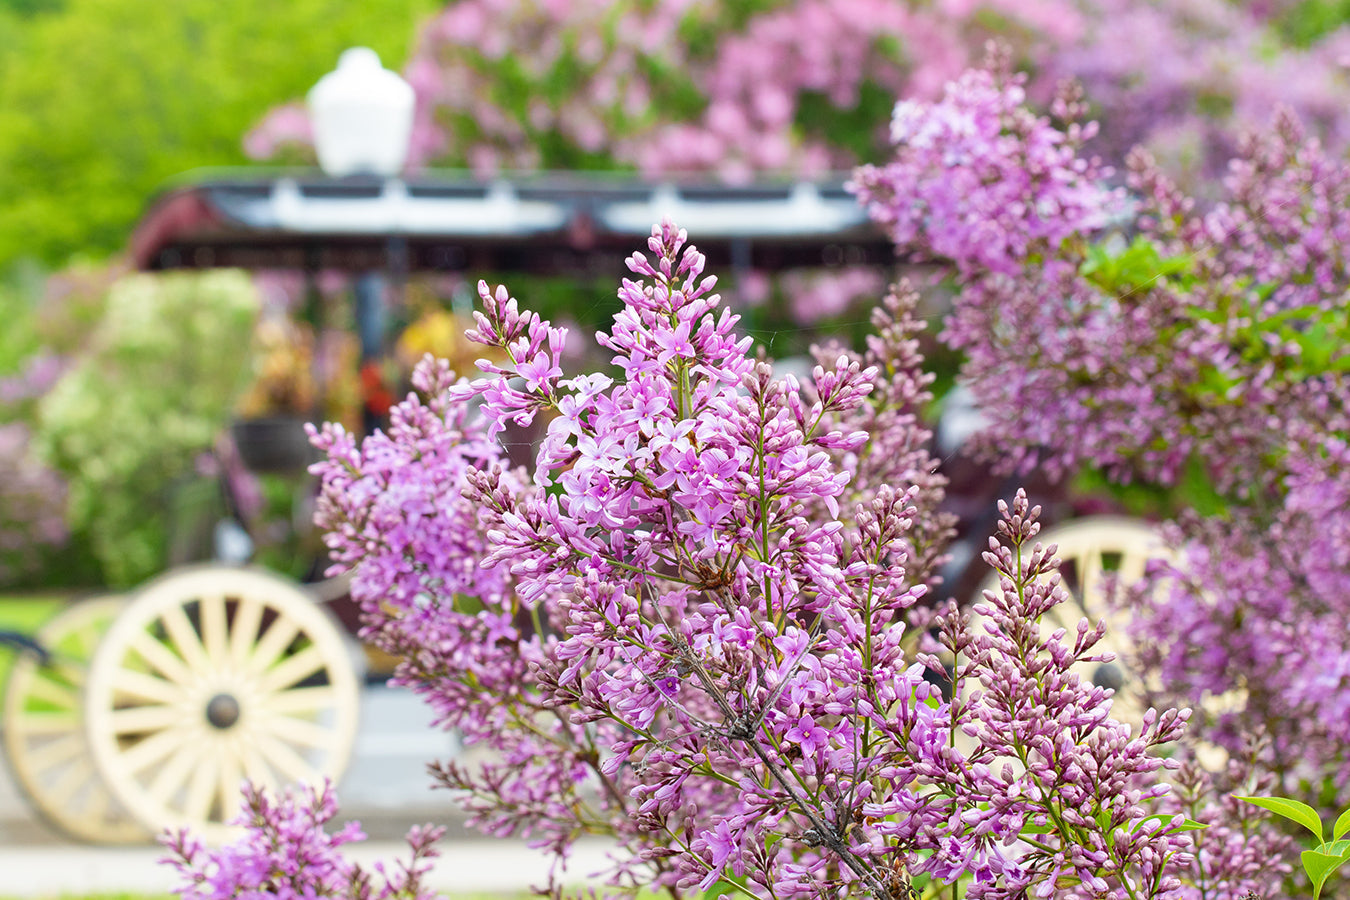 Lilac Blooms by Jennifer Wohletz.  Photography on canvas mounted on black styrene. 10" x 15"  Description:  A riot of lilac blooms frame a horse-drawn carriage parked in front of Mackinac Island's Marquette Park.  In June, a canopy of fragrance settles over Mackinac Island as hundreds of lilacs bloom throughout the island.   